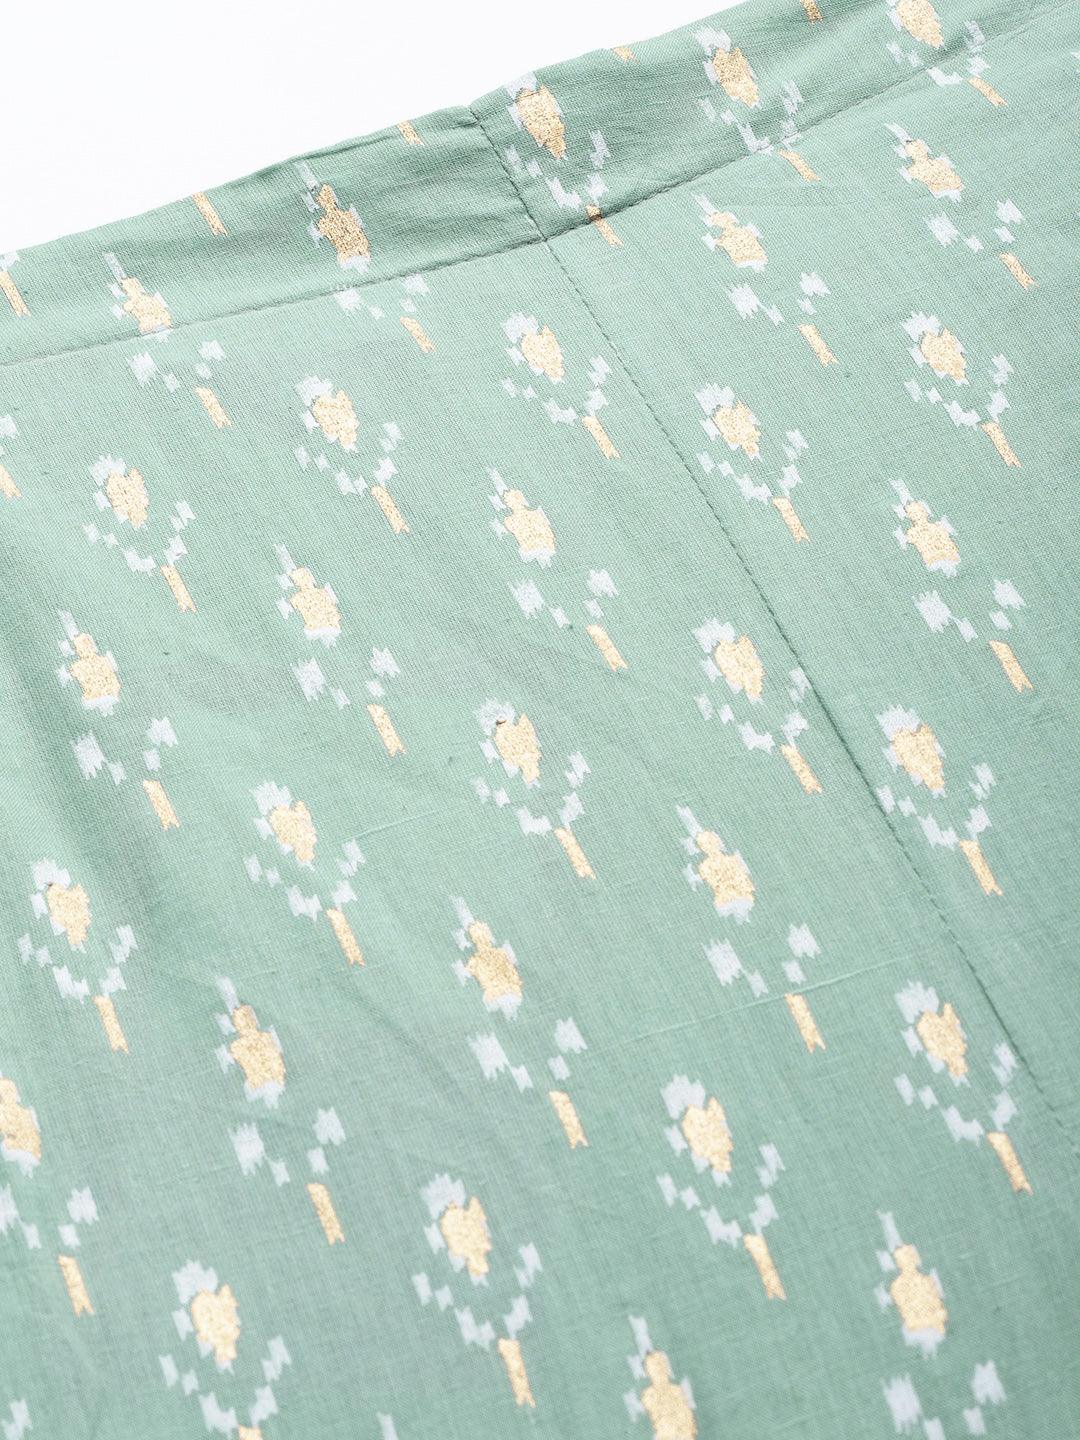 Green Printed Cotton Trousers